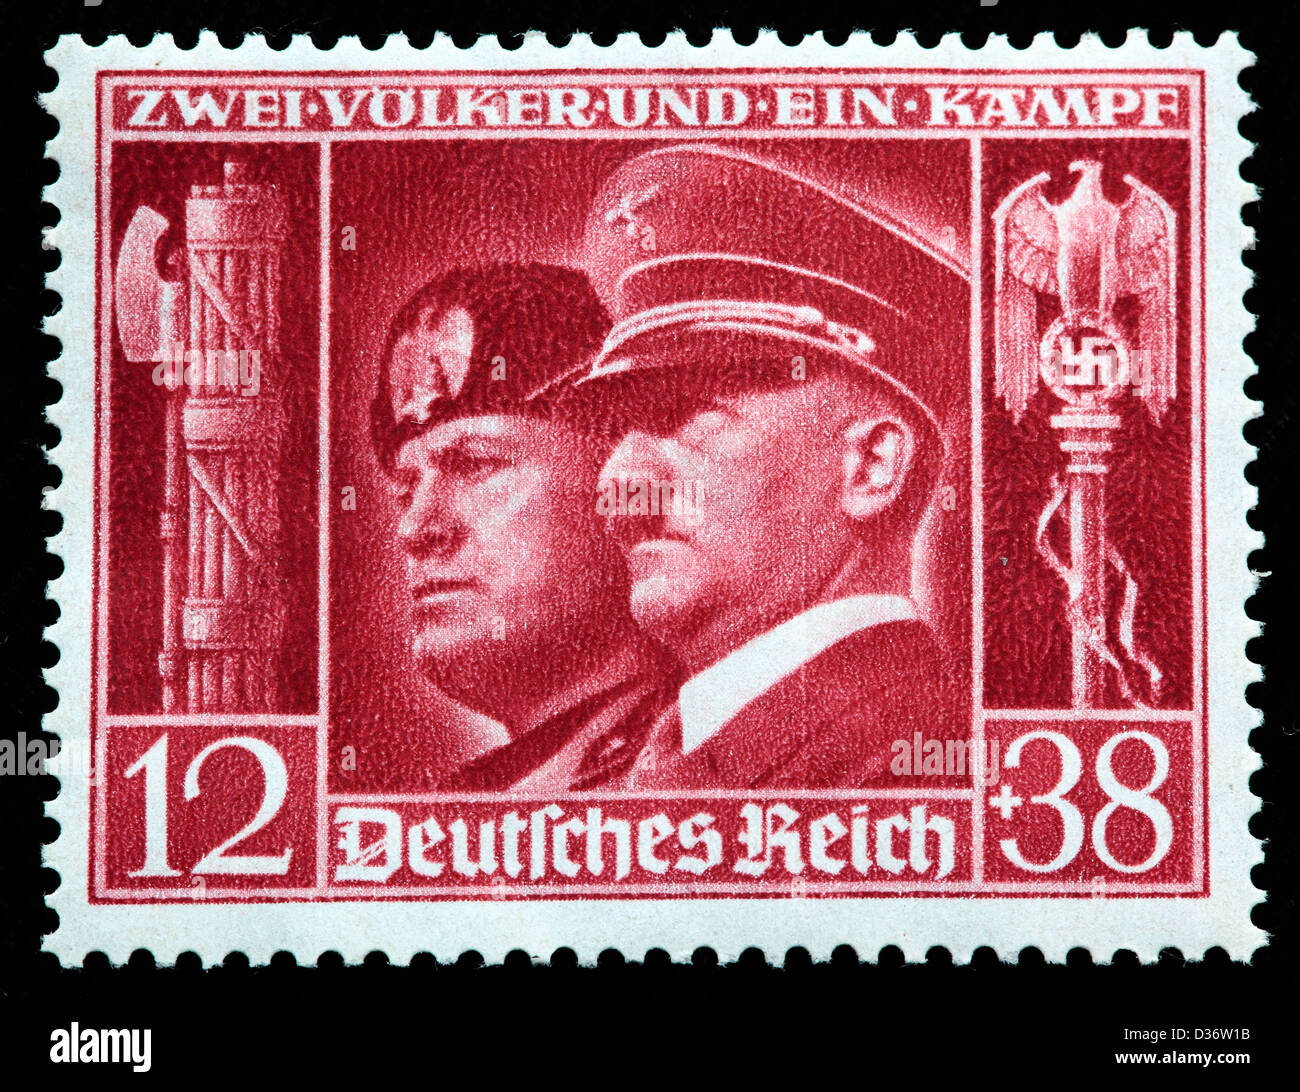 Benito Mussolini and Adolf Hitler, postage stamp, Germany, 1941 Stock Photo